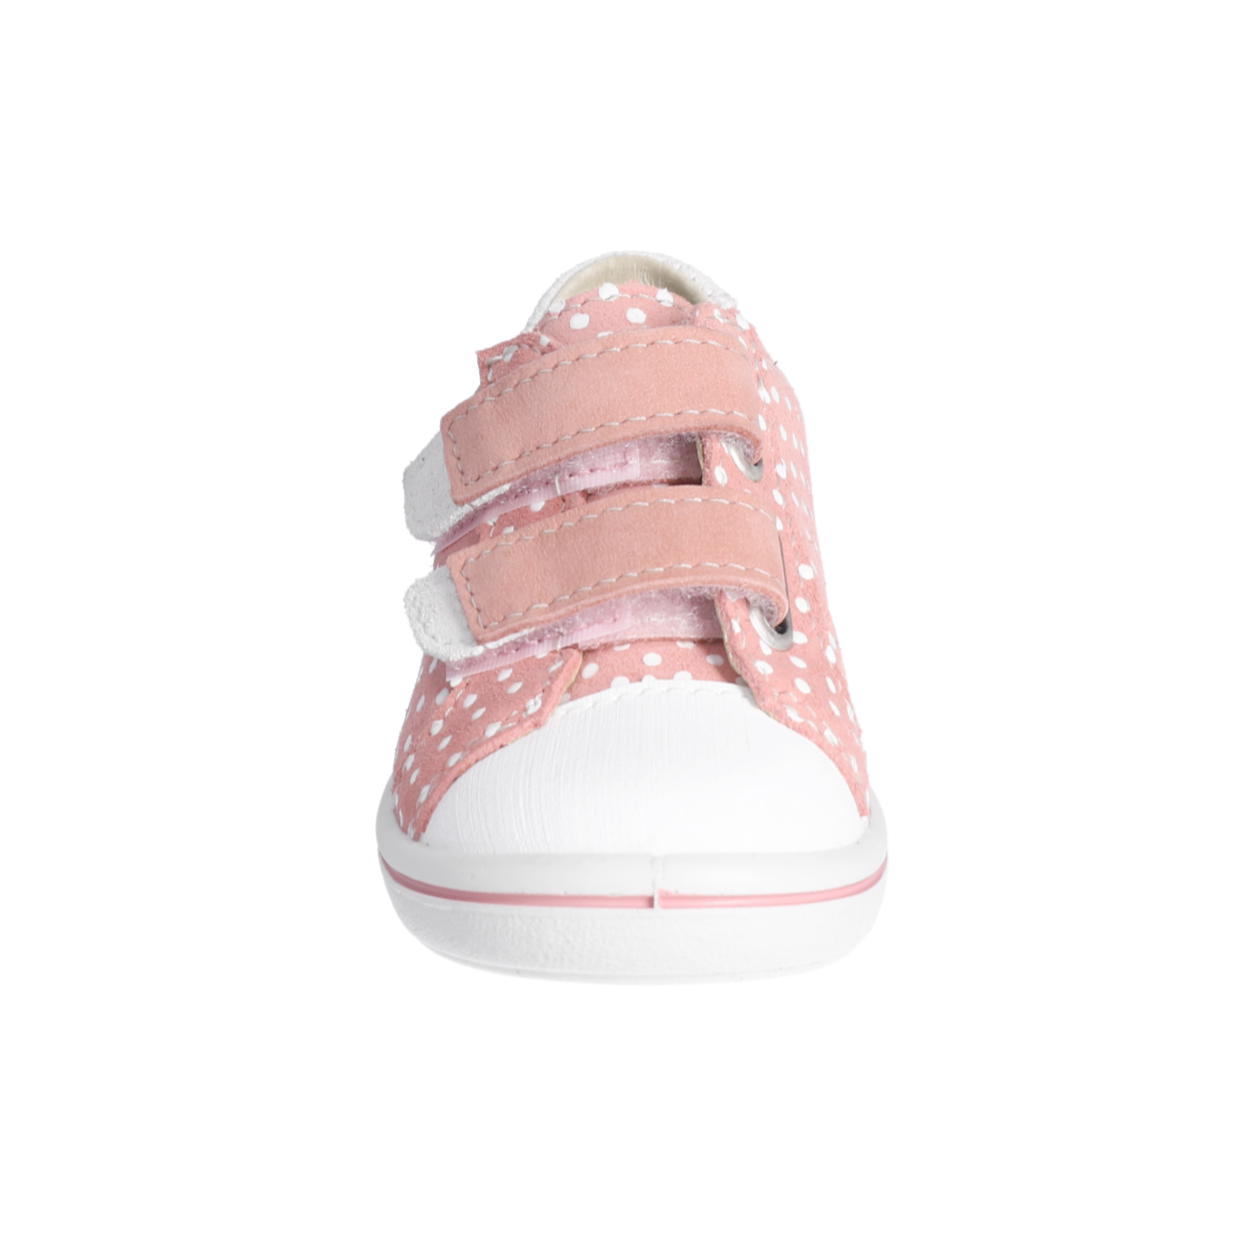 Niccy Leather Sneaker in Strawberry Pink and White Ditsy Dots